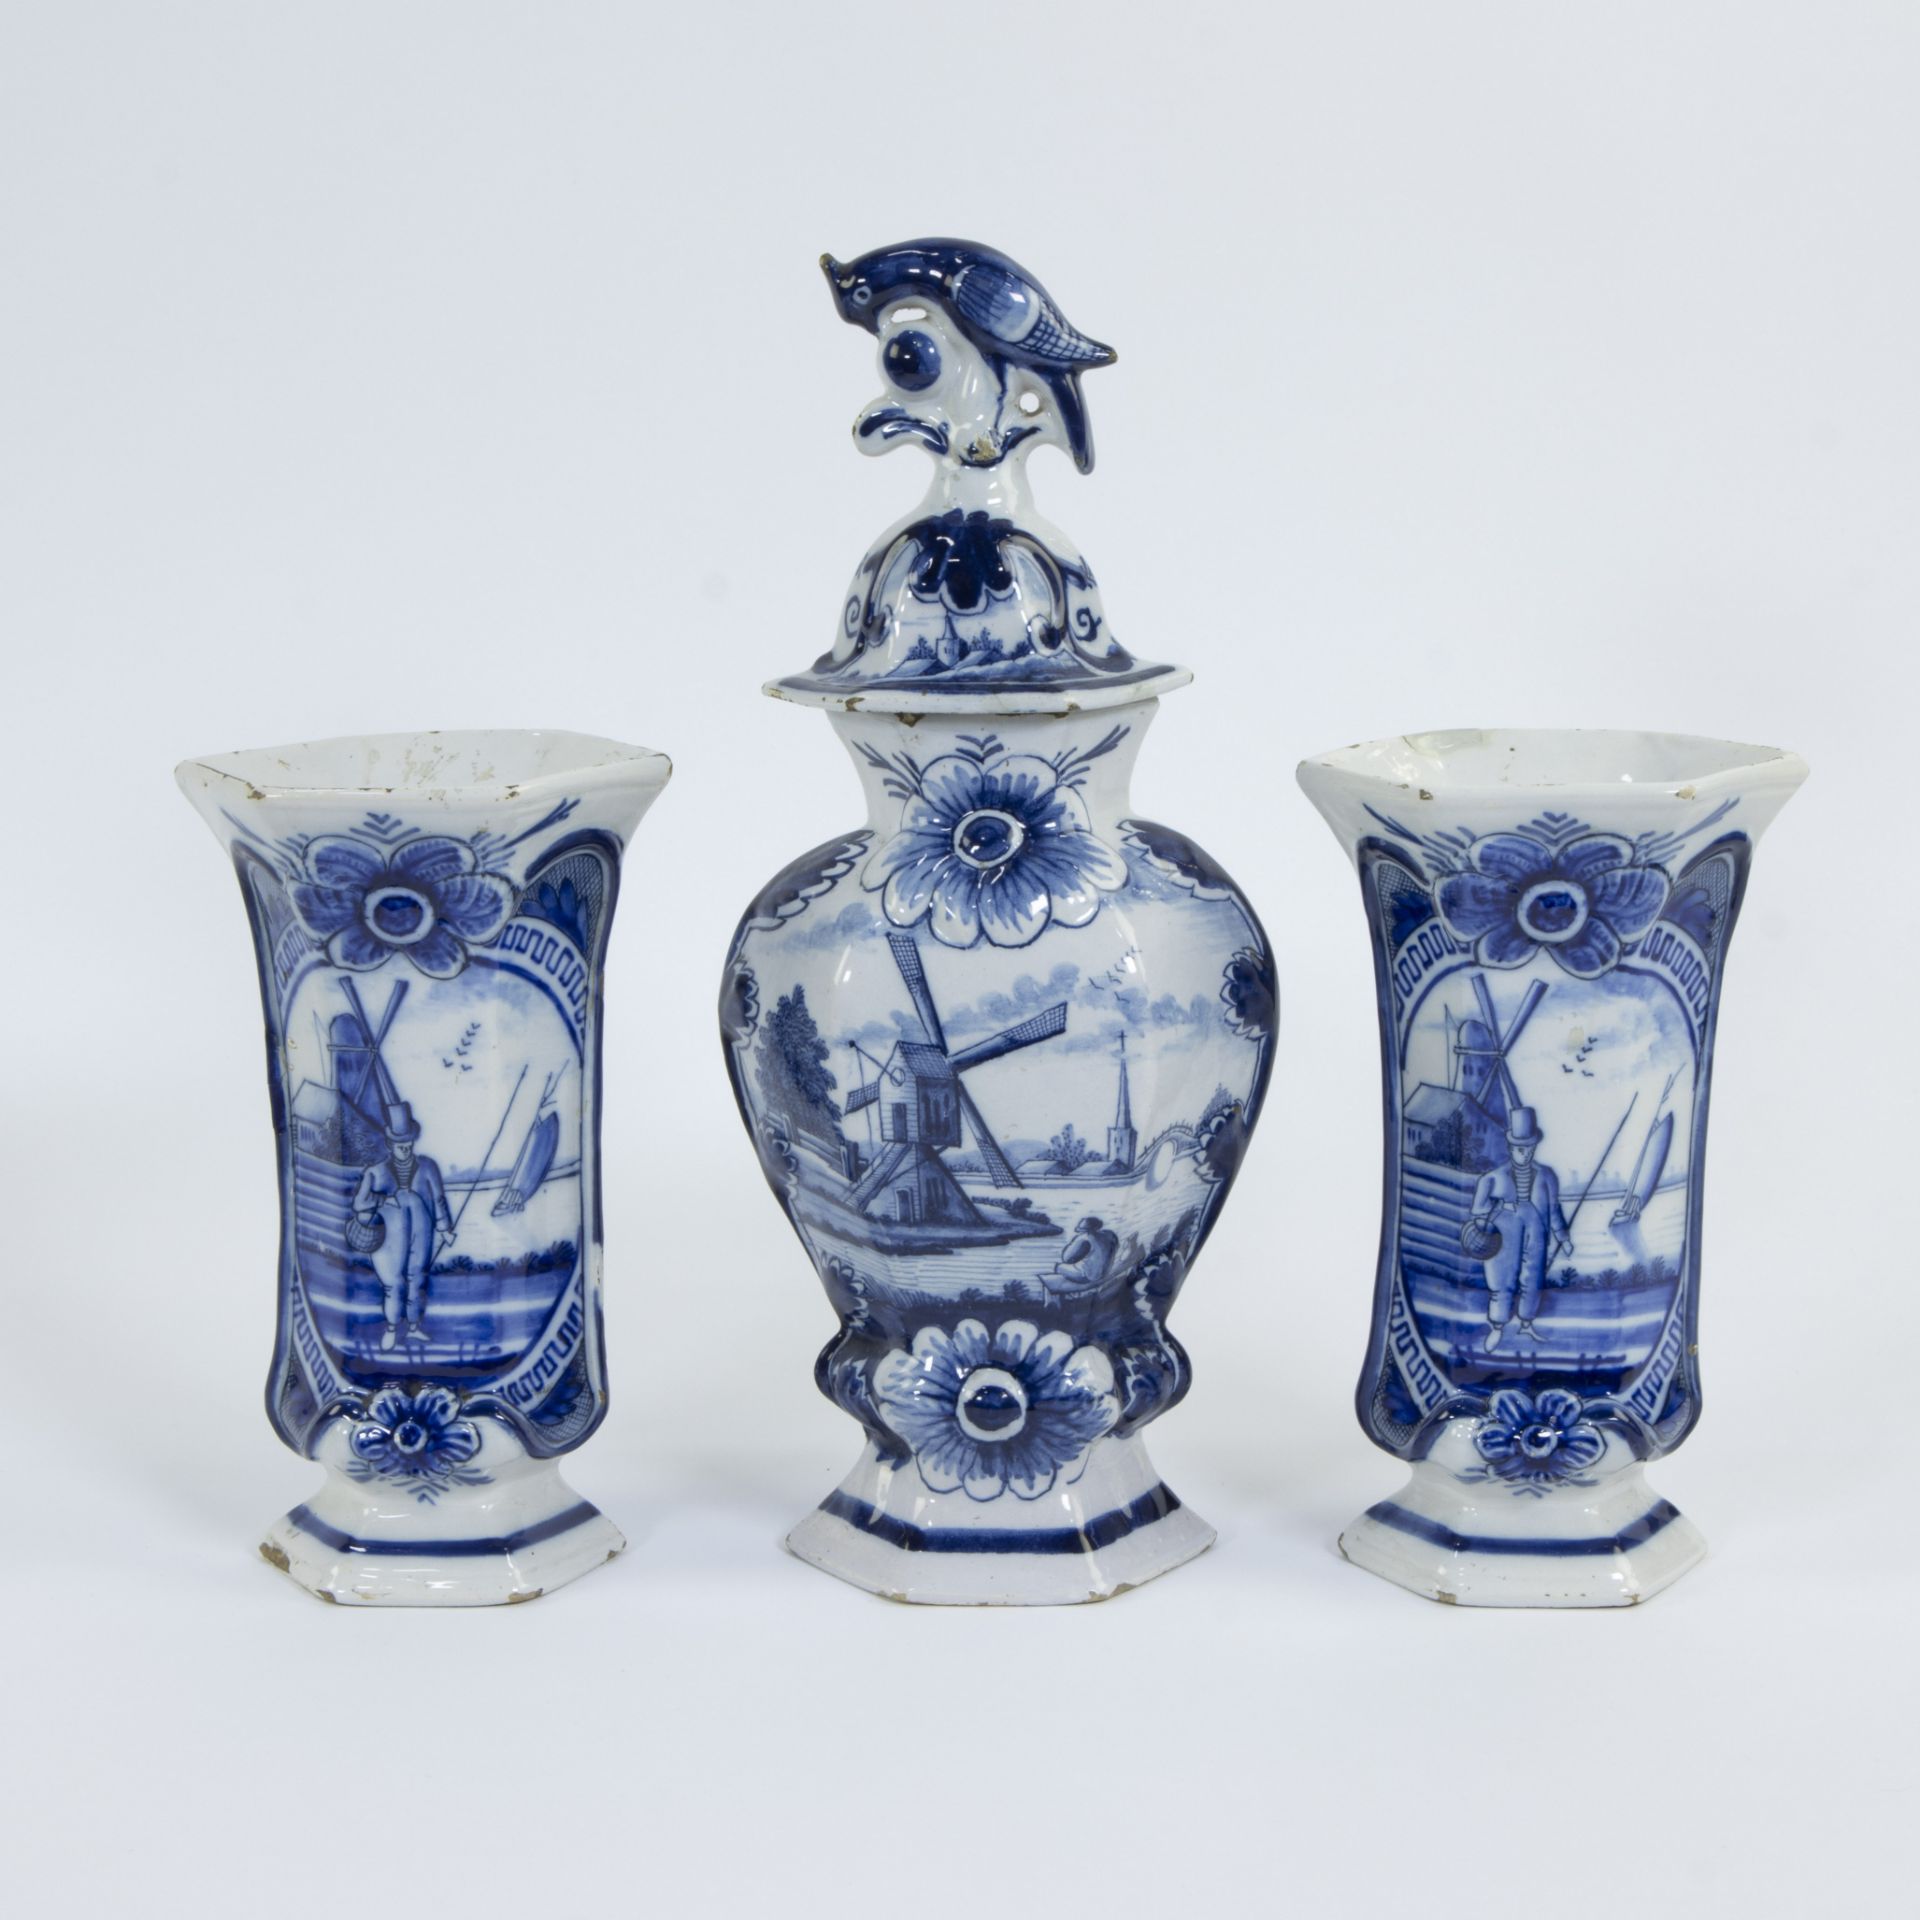 Collection Delftware, 3 polychrome plates 18th century and 3 vases blue white from a garniture set - Bild 4 aus 5